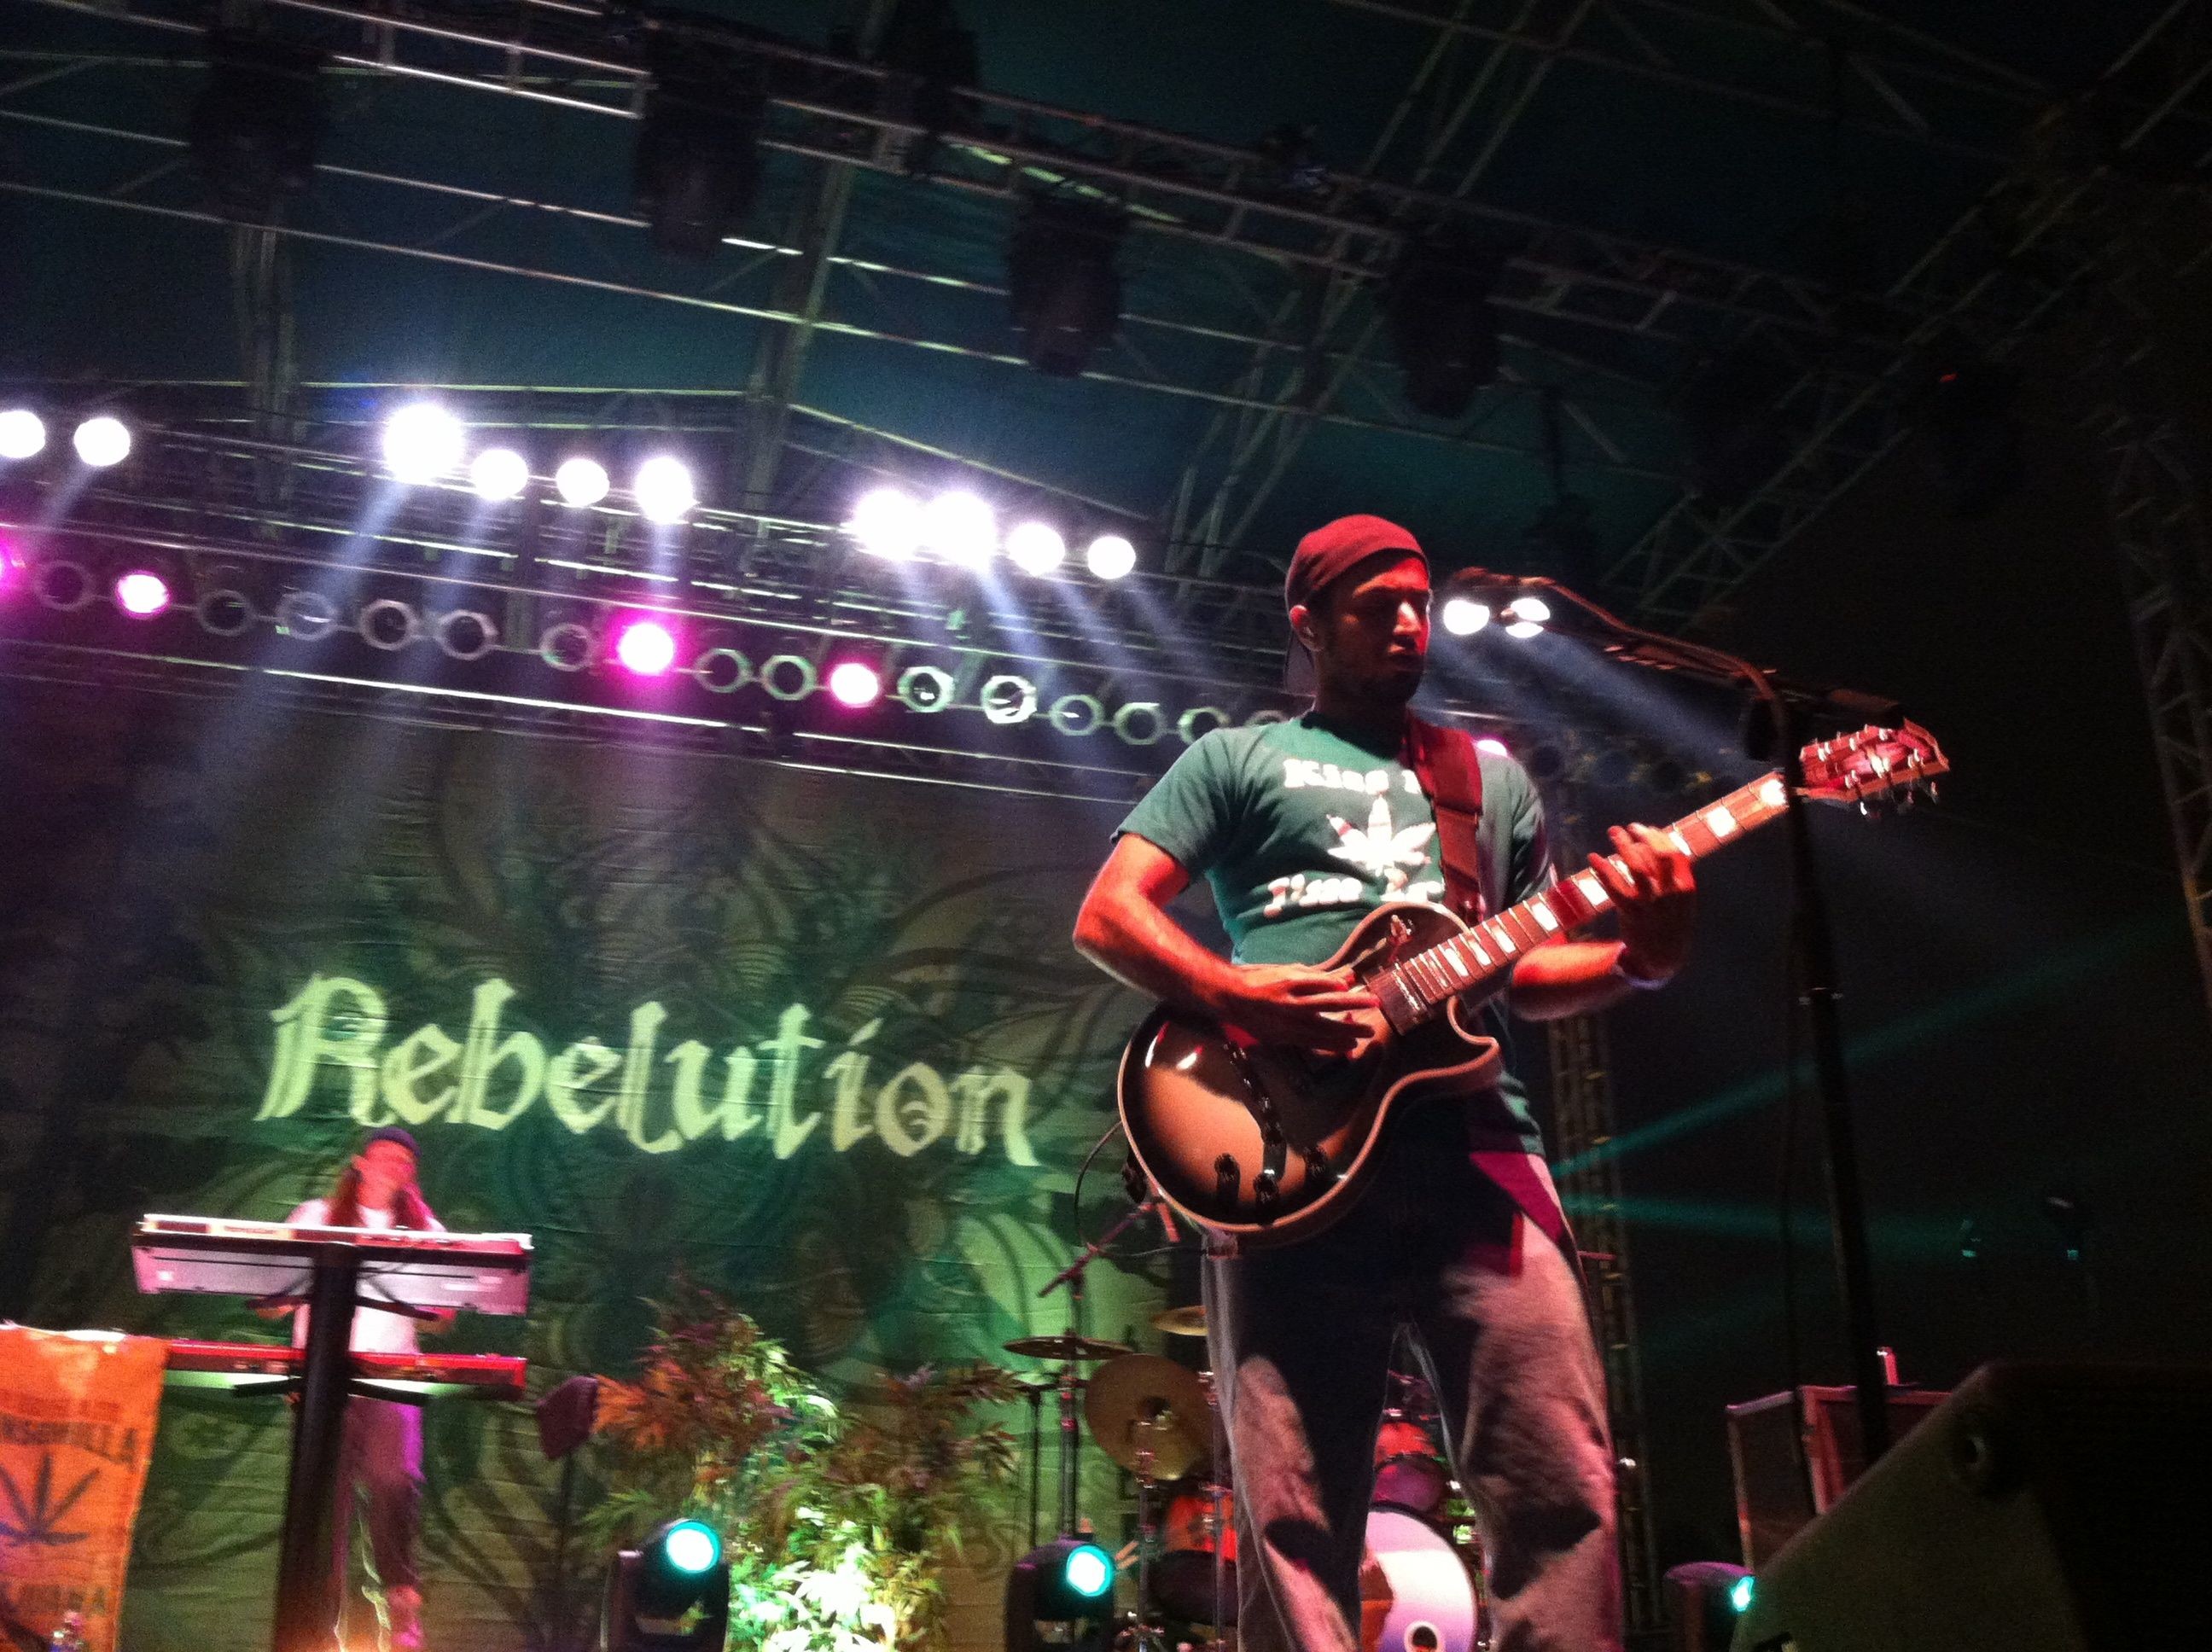 2592x1936 A Rebelution Concert to Remember